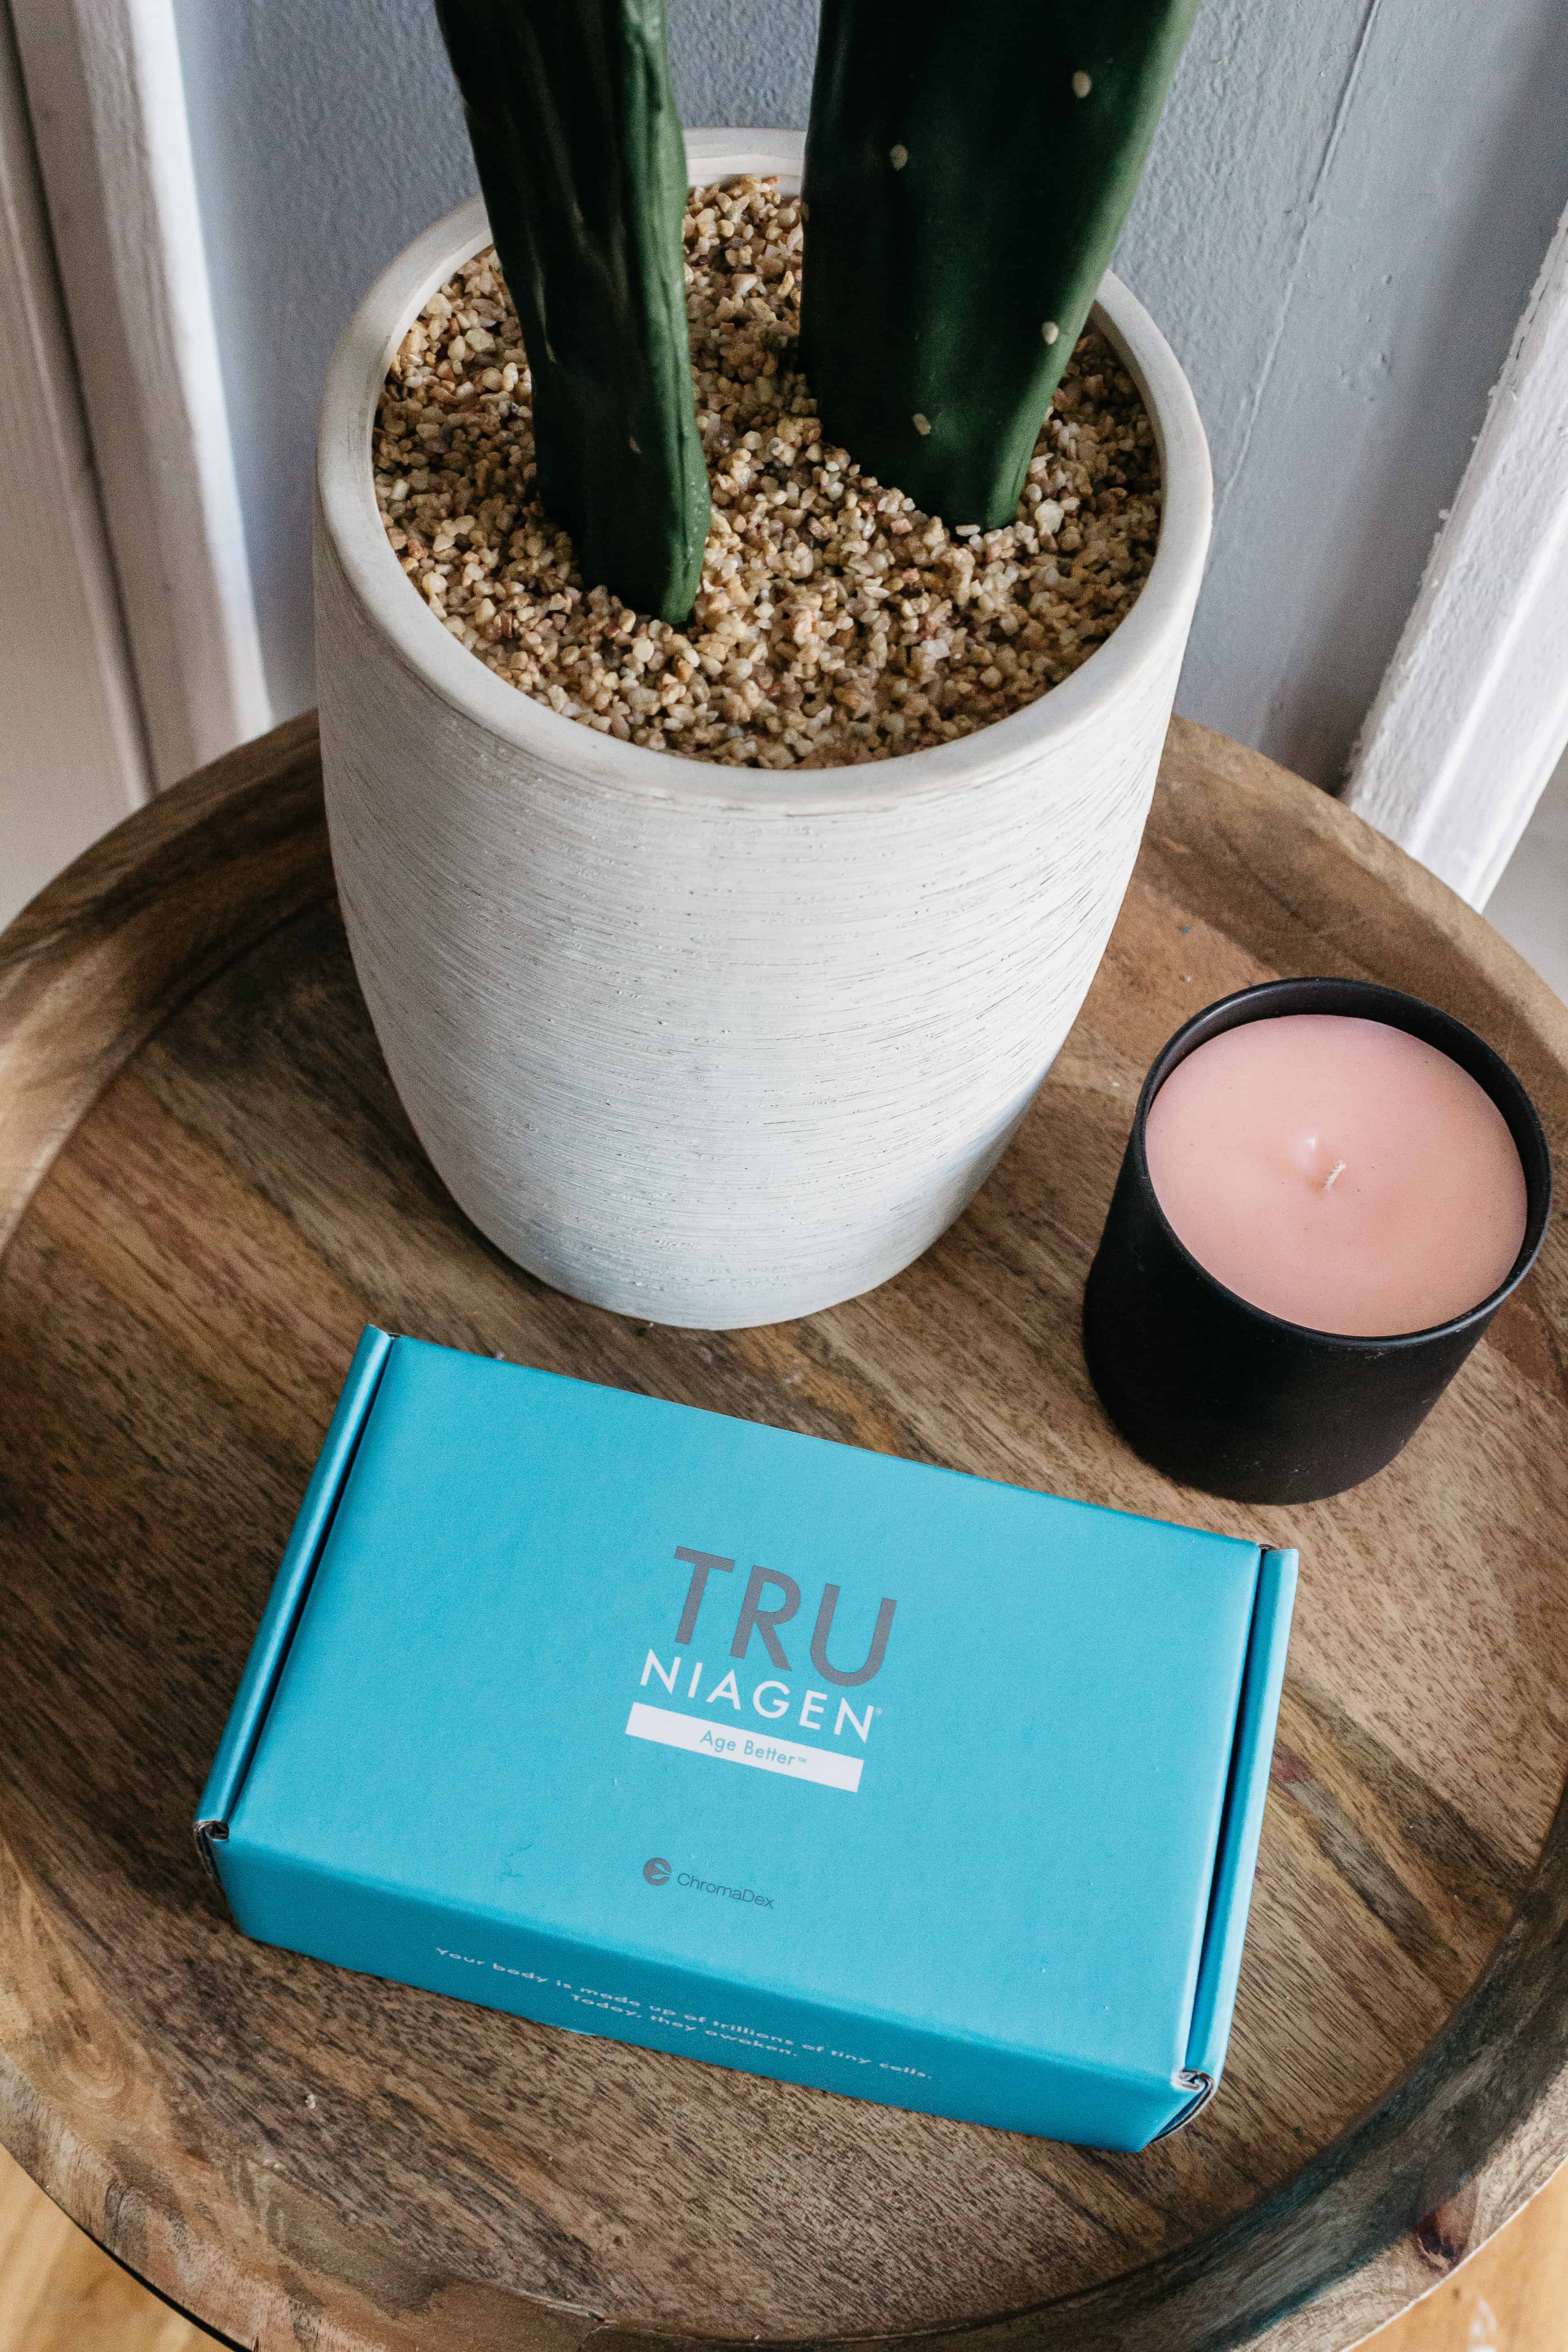 Tru Niagen: A New Supplement For My Morning Routine